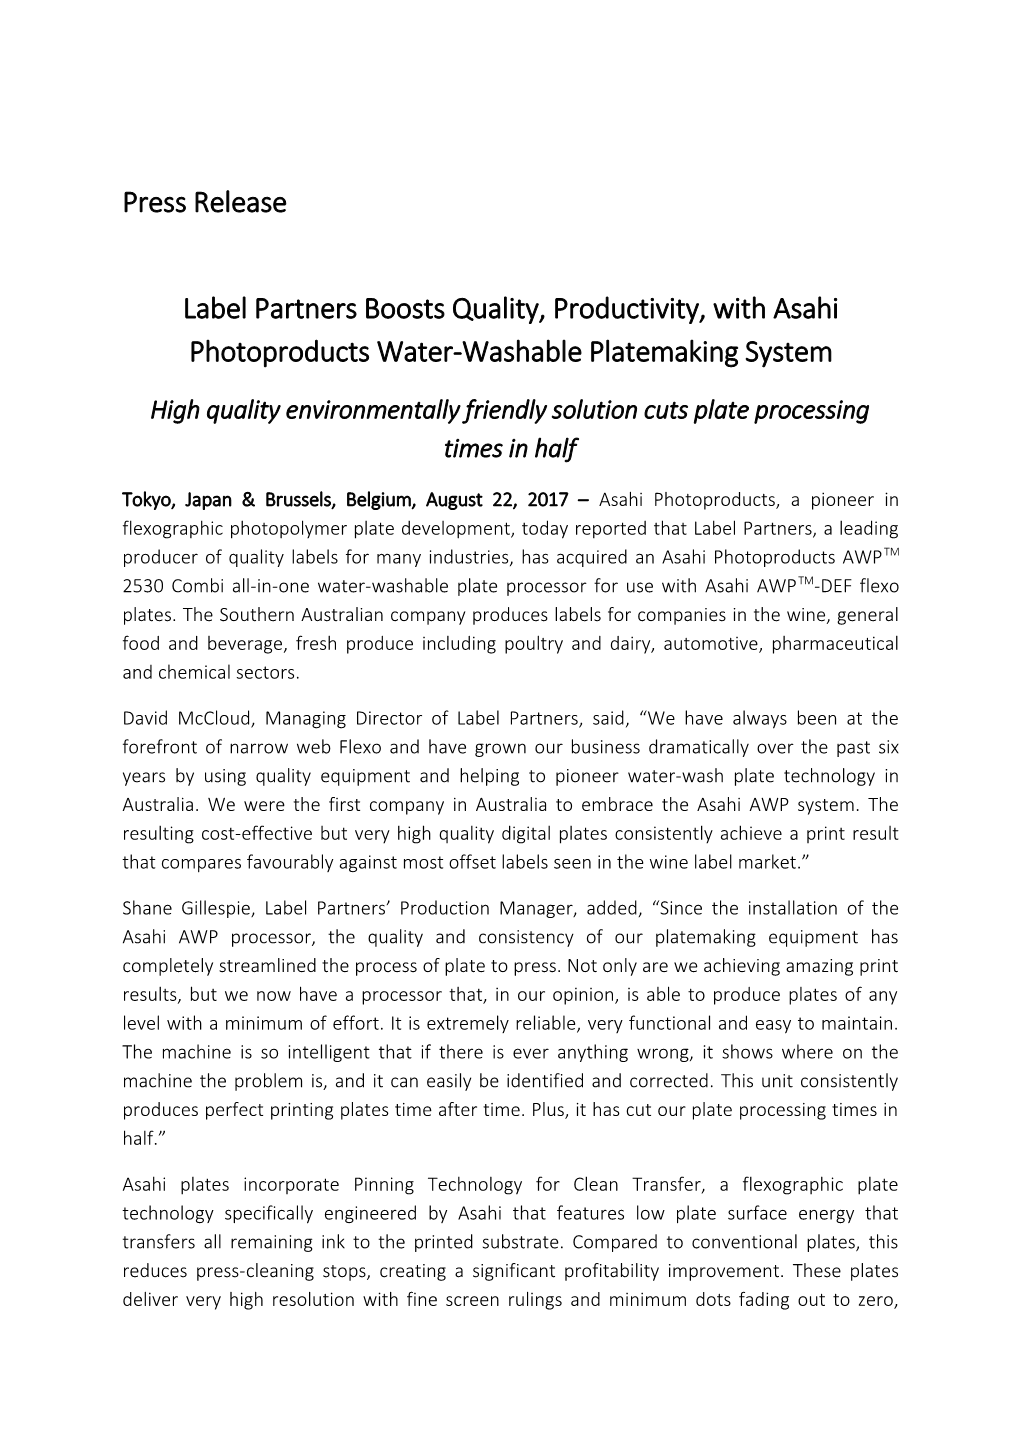 Label Partners Boosts Quality, Productivity, with Asahi Photoproducts Water-Washable Platemaking